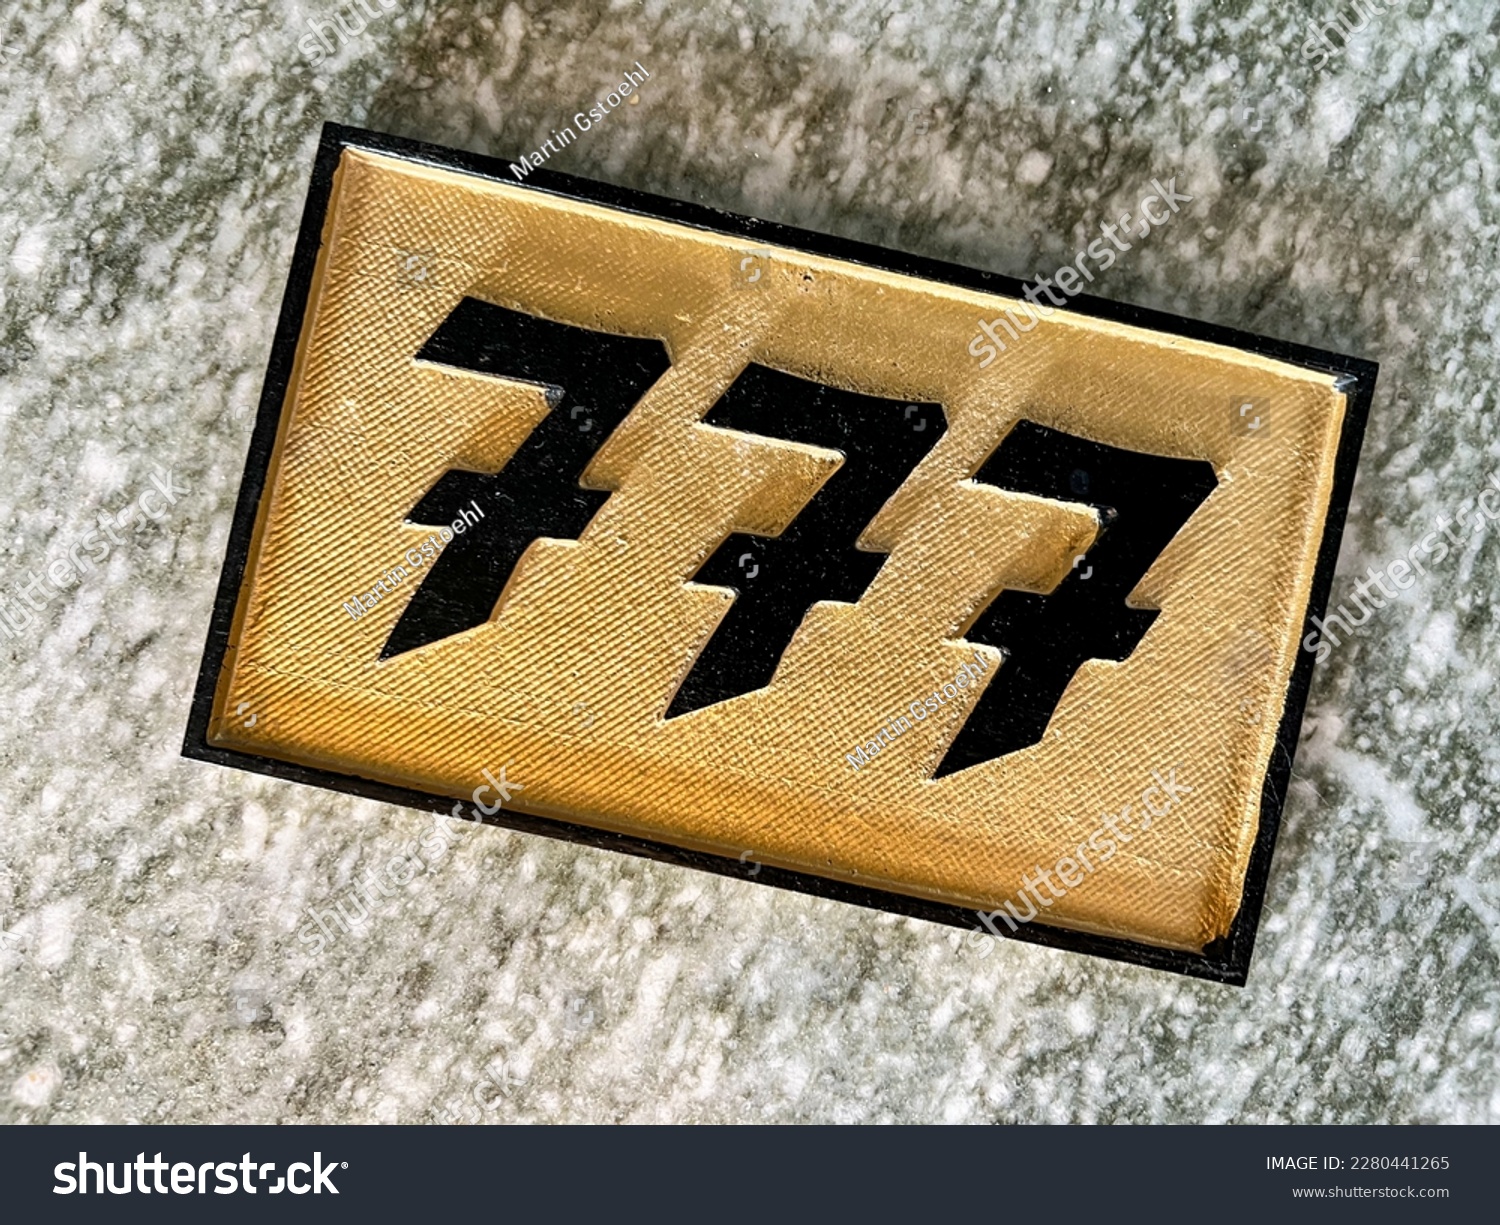 High angle view of golden house number plate on granite underground #2280441265